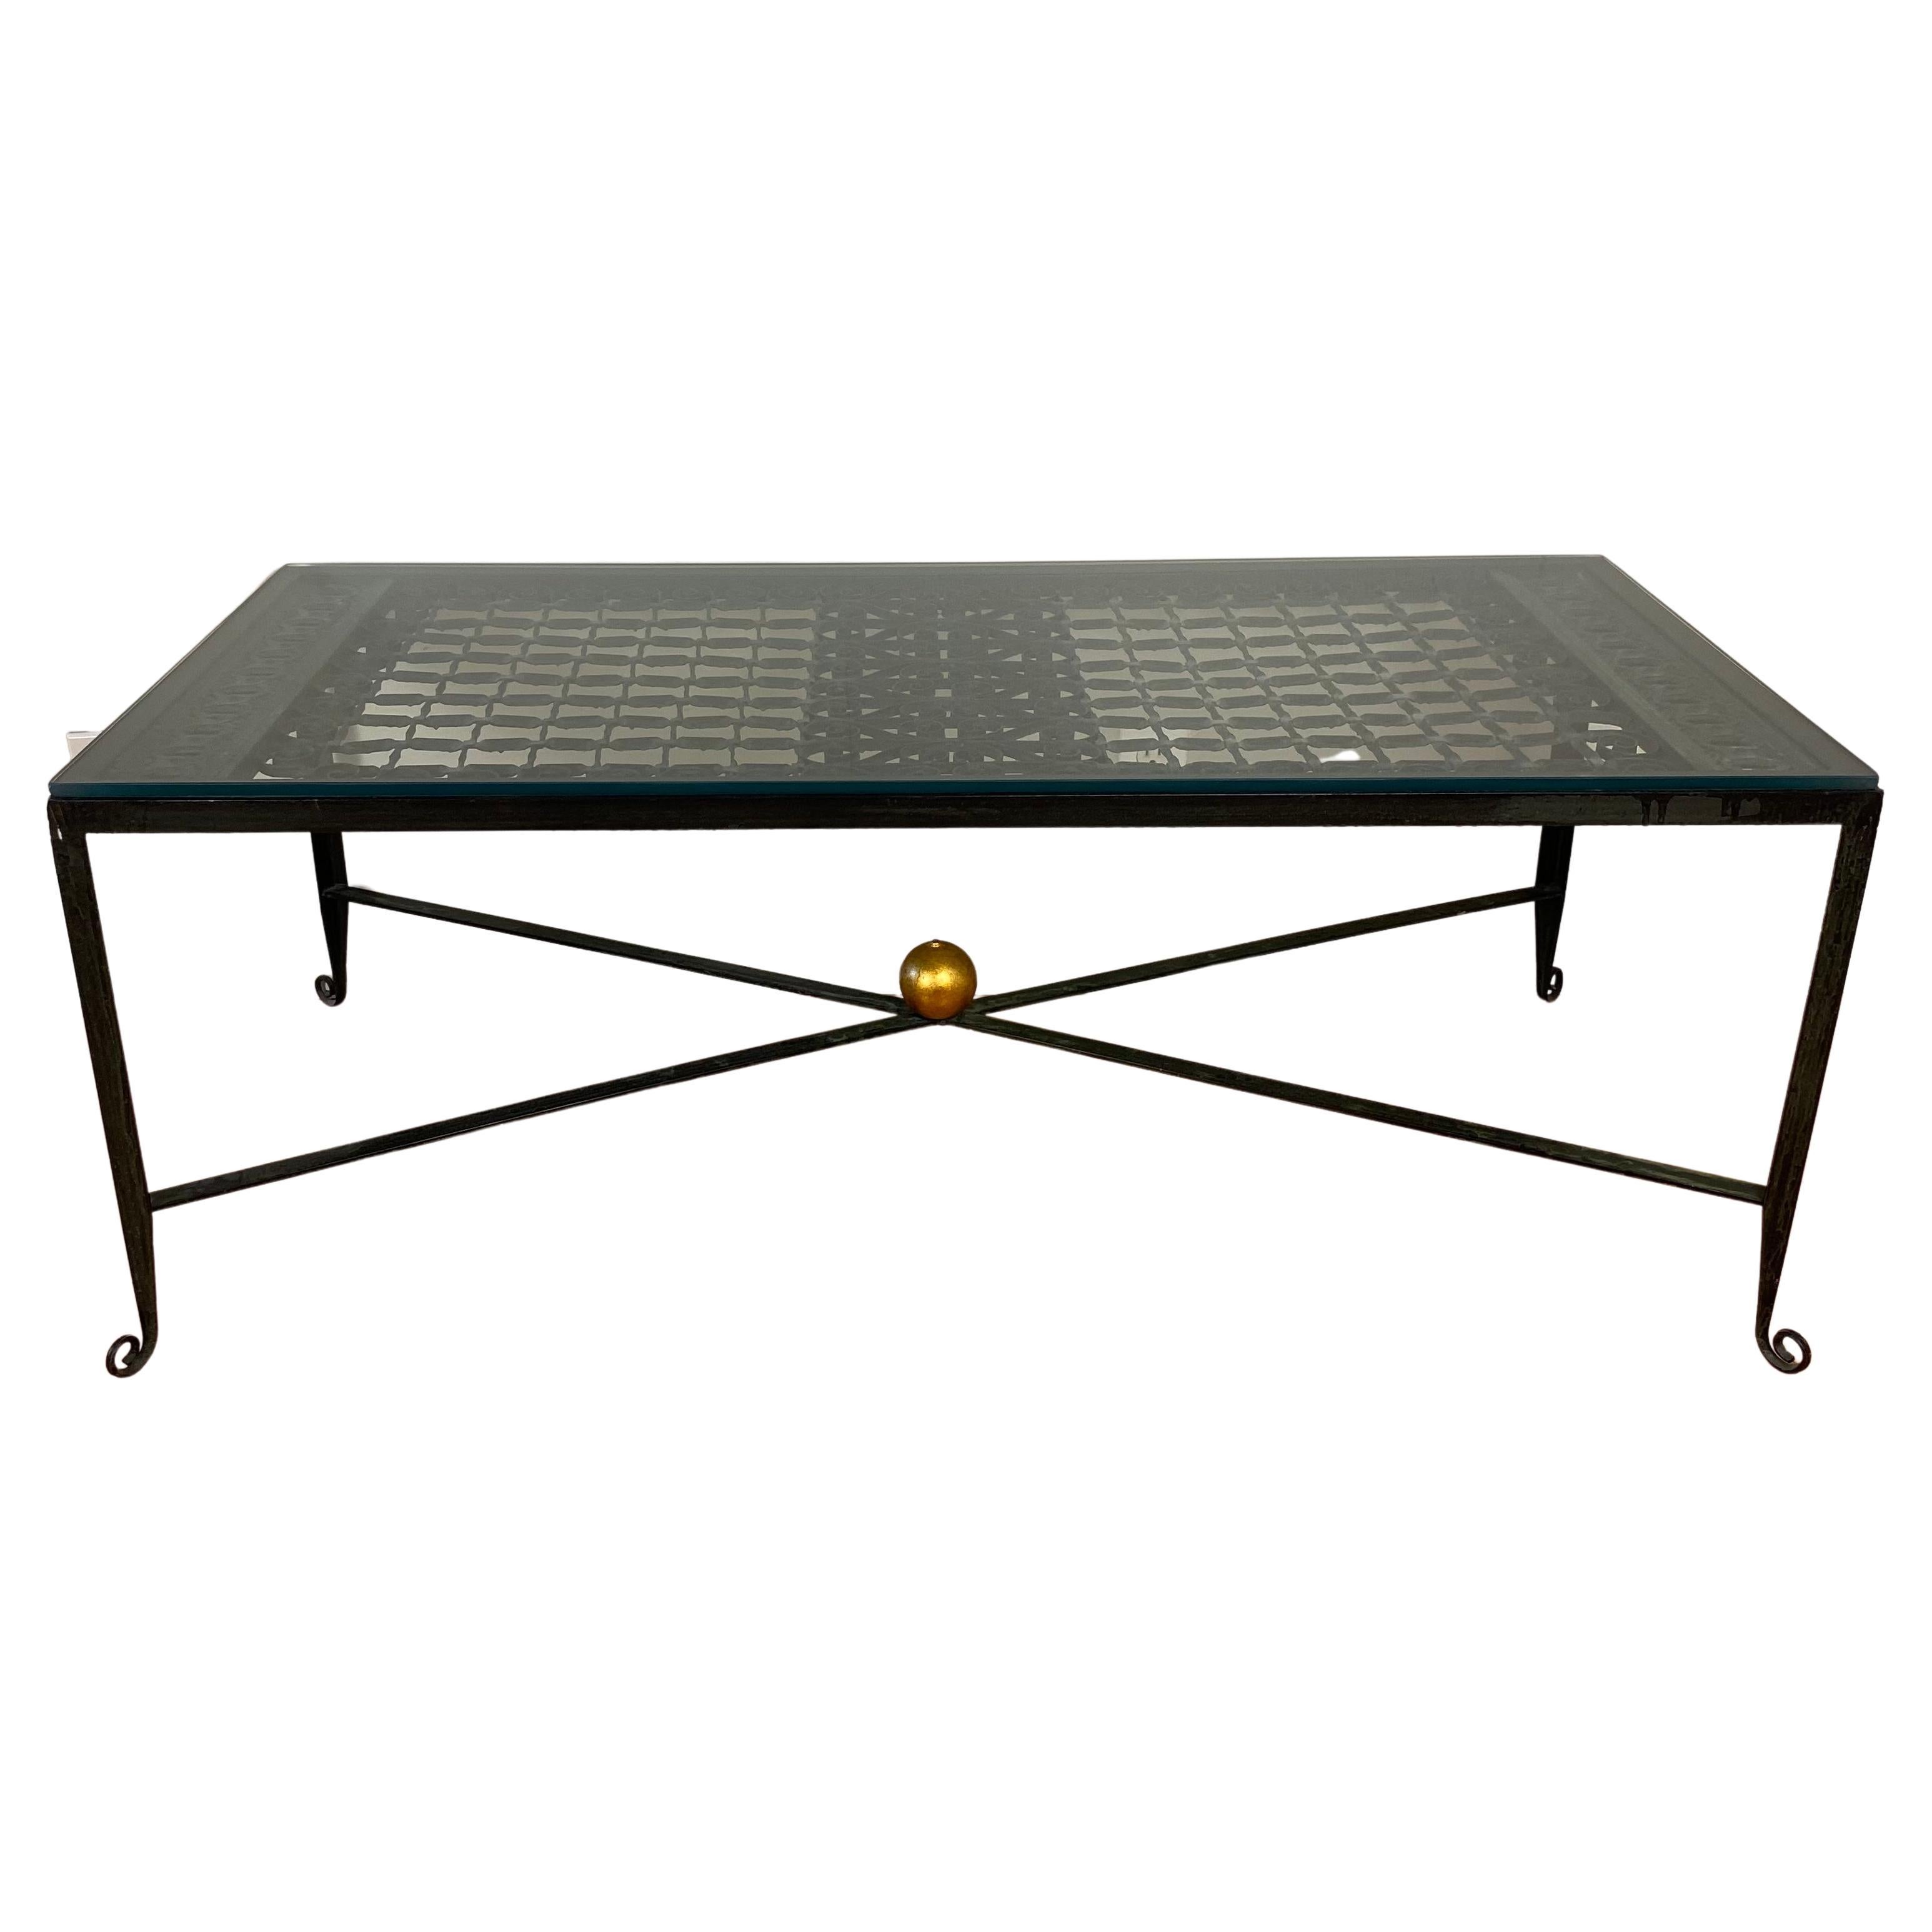 Decorative Wrought Iron Cocktail Coffee Table, Architectural Element Glass Top